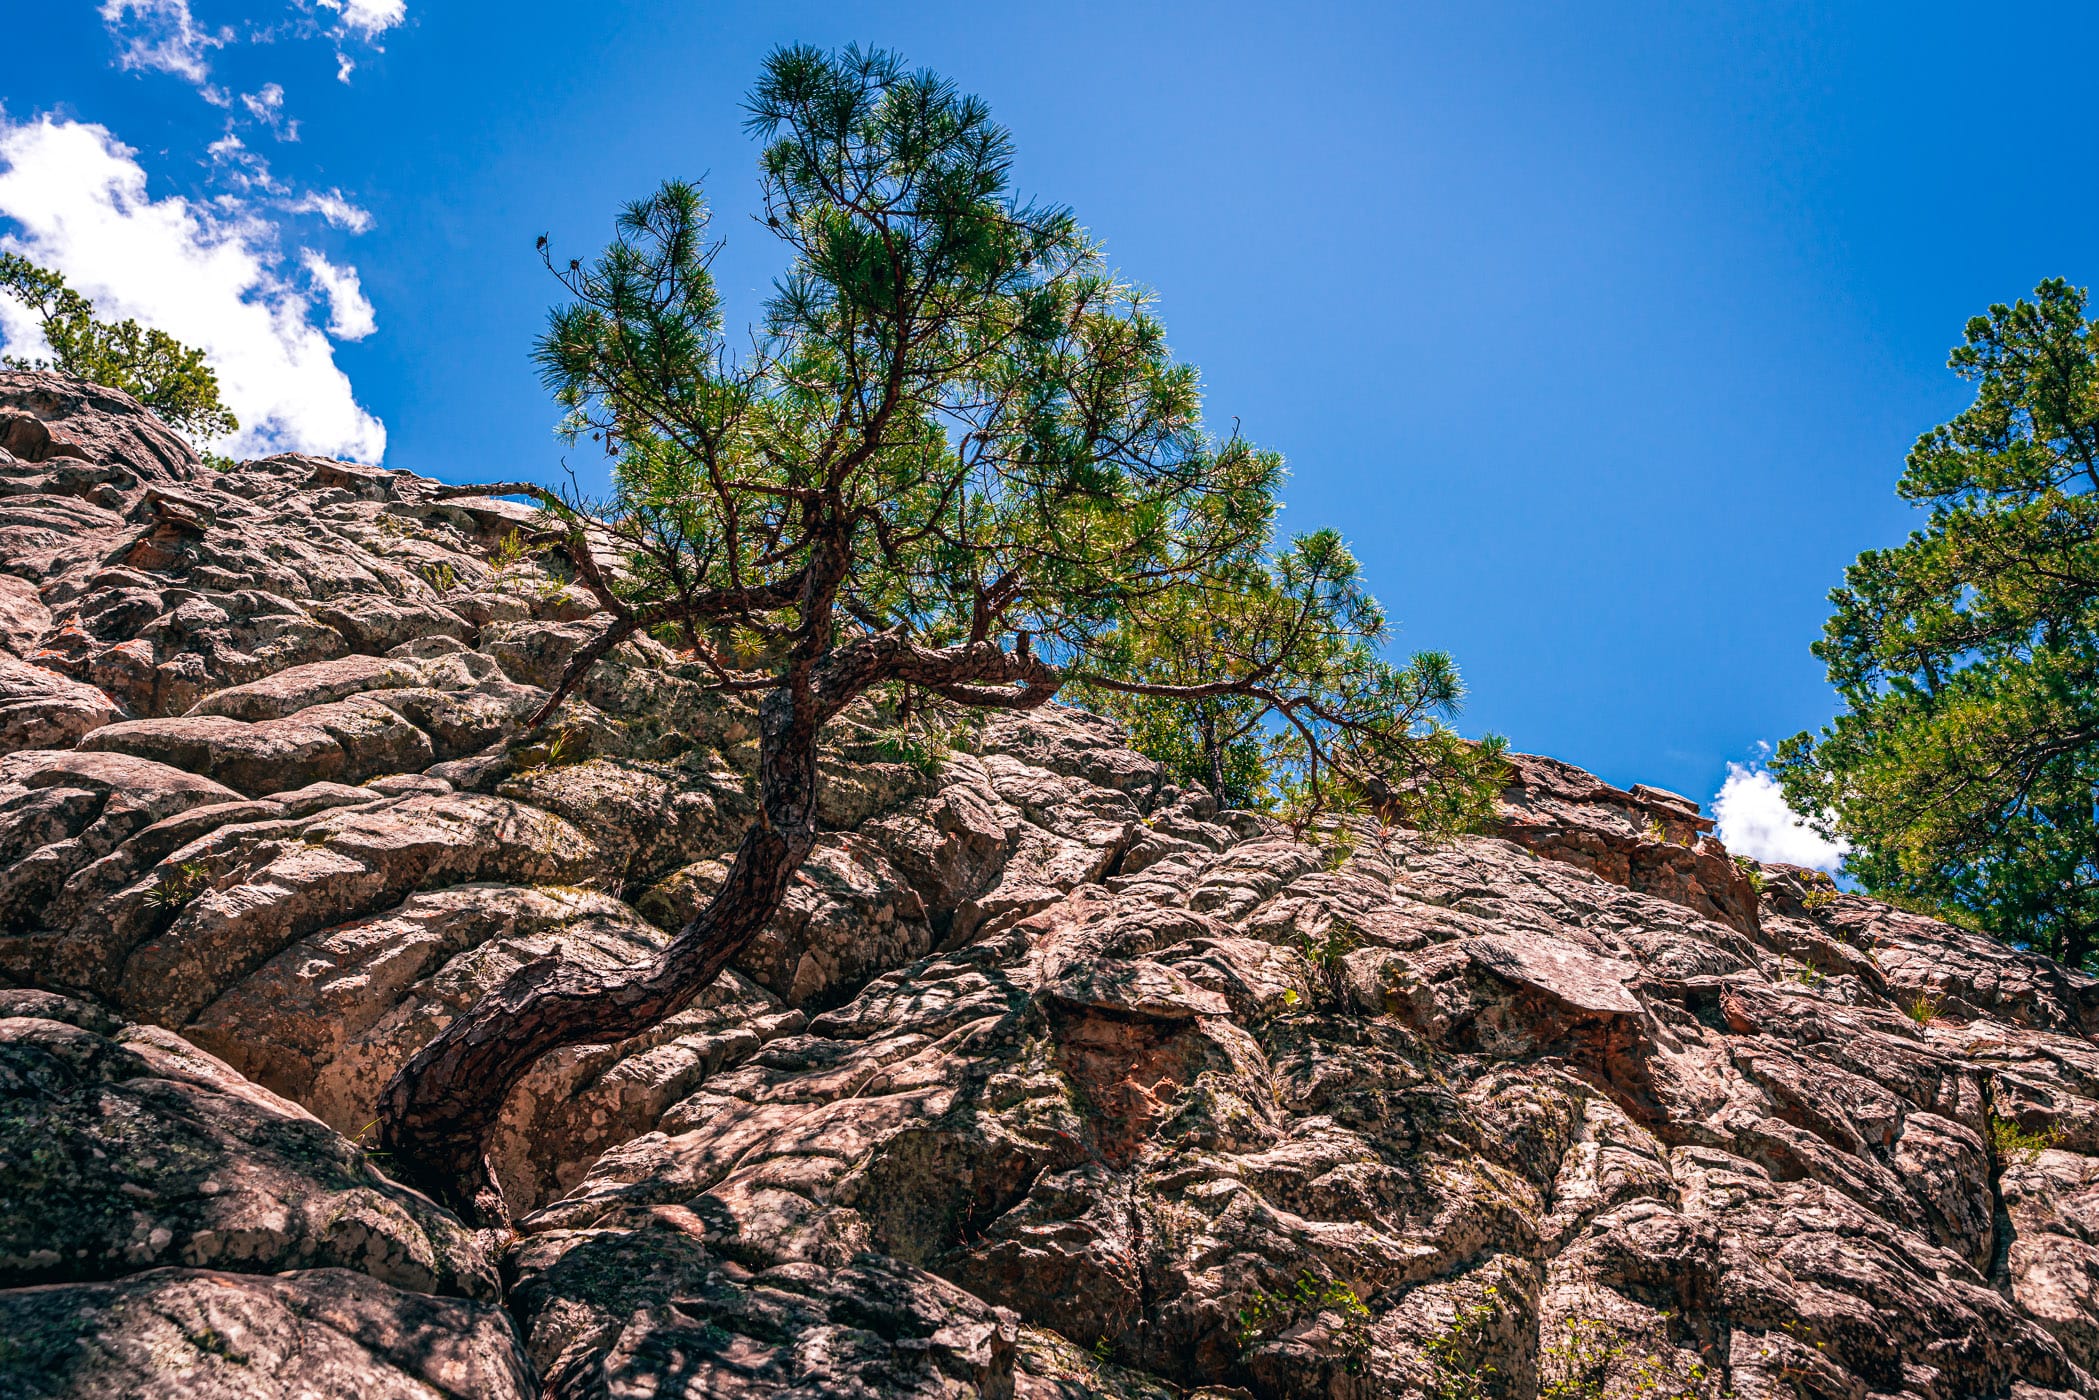 A tree grows from a rocky outcropping at Oklahoma's Robbers Cave State Park.